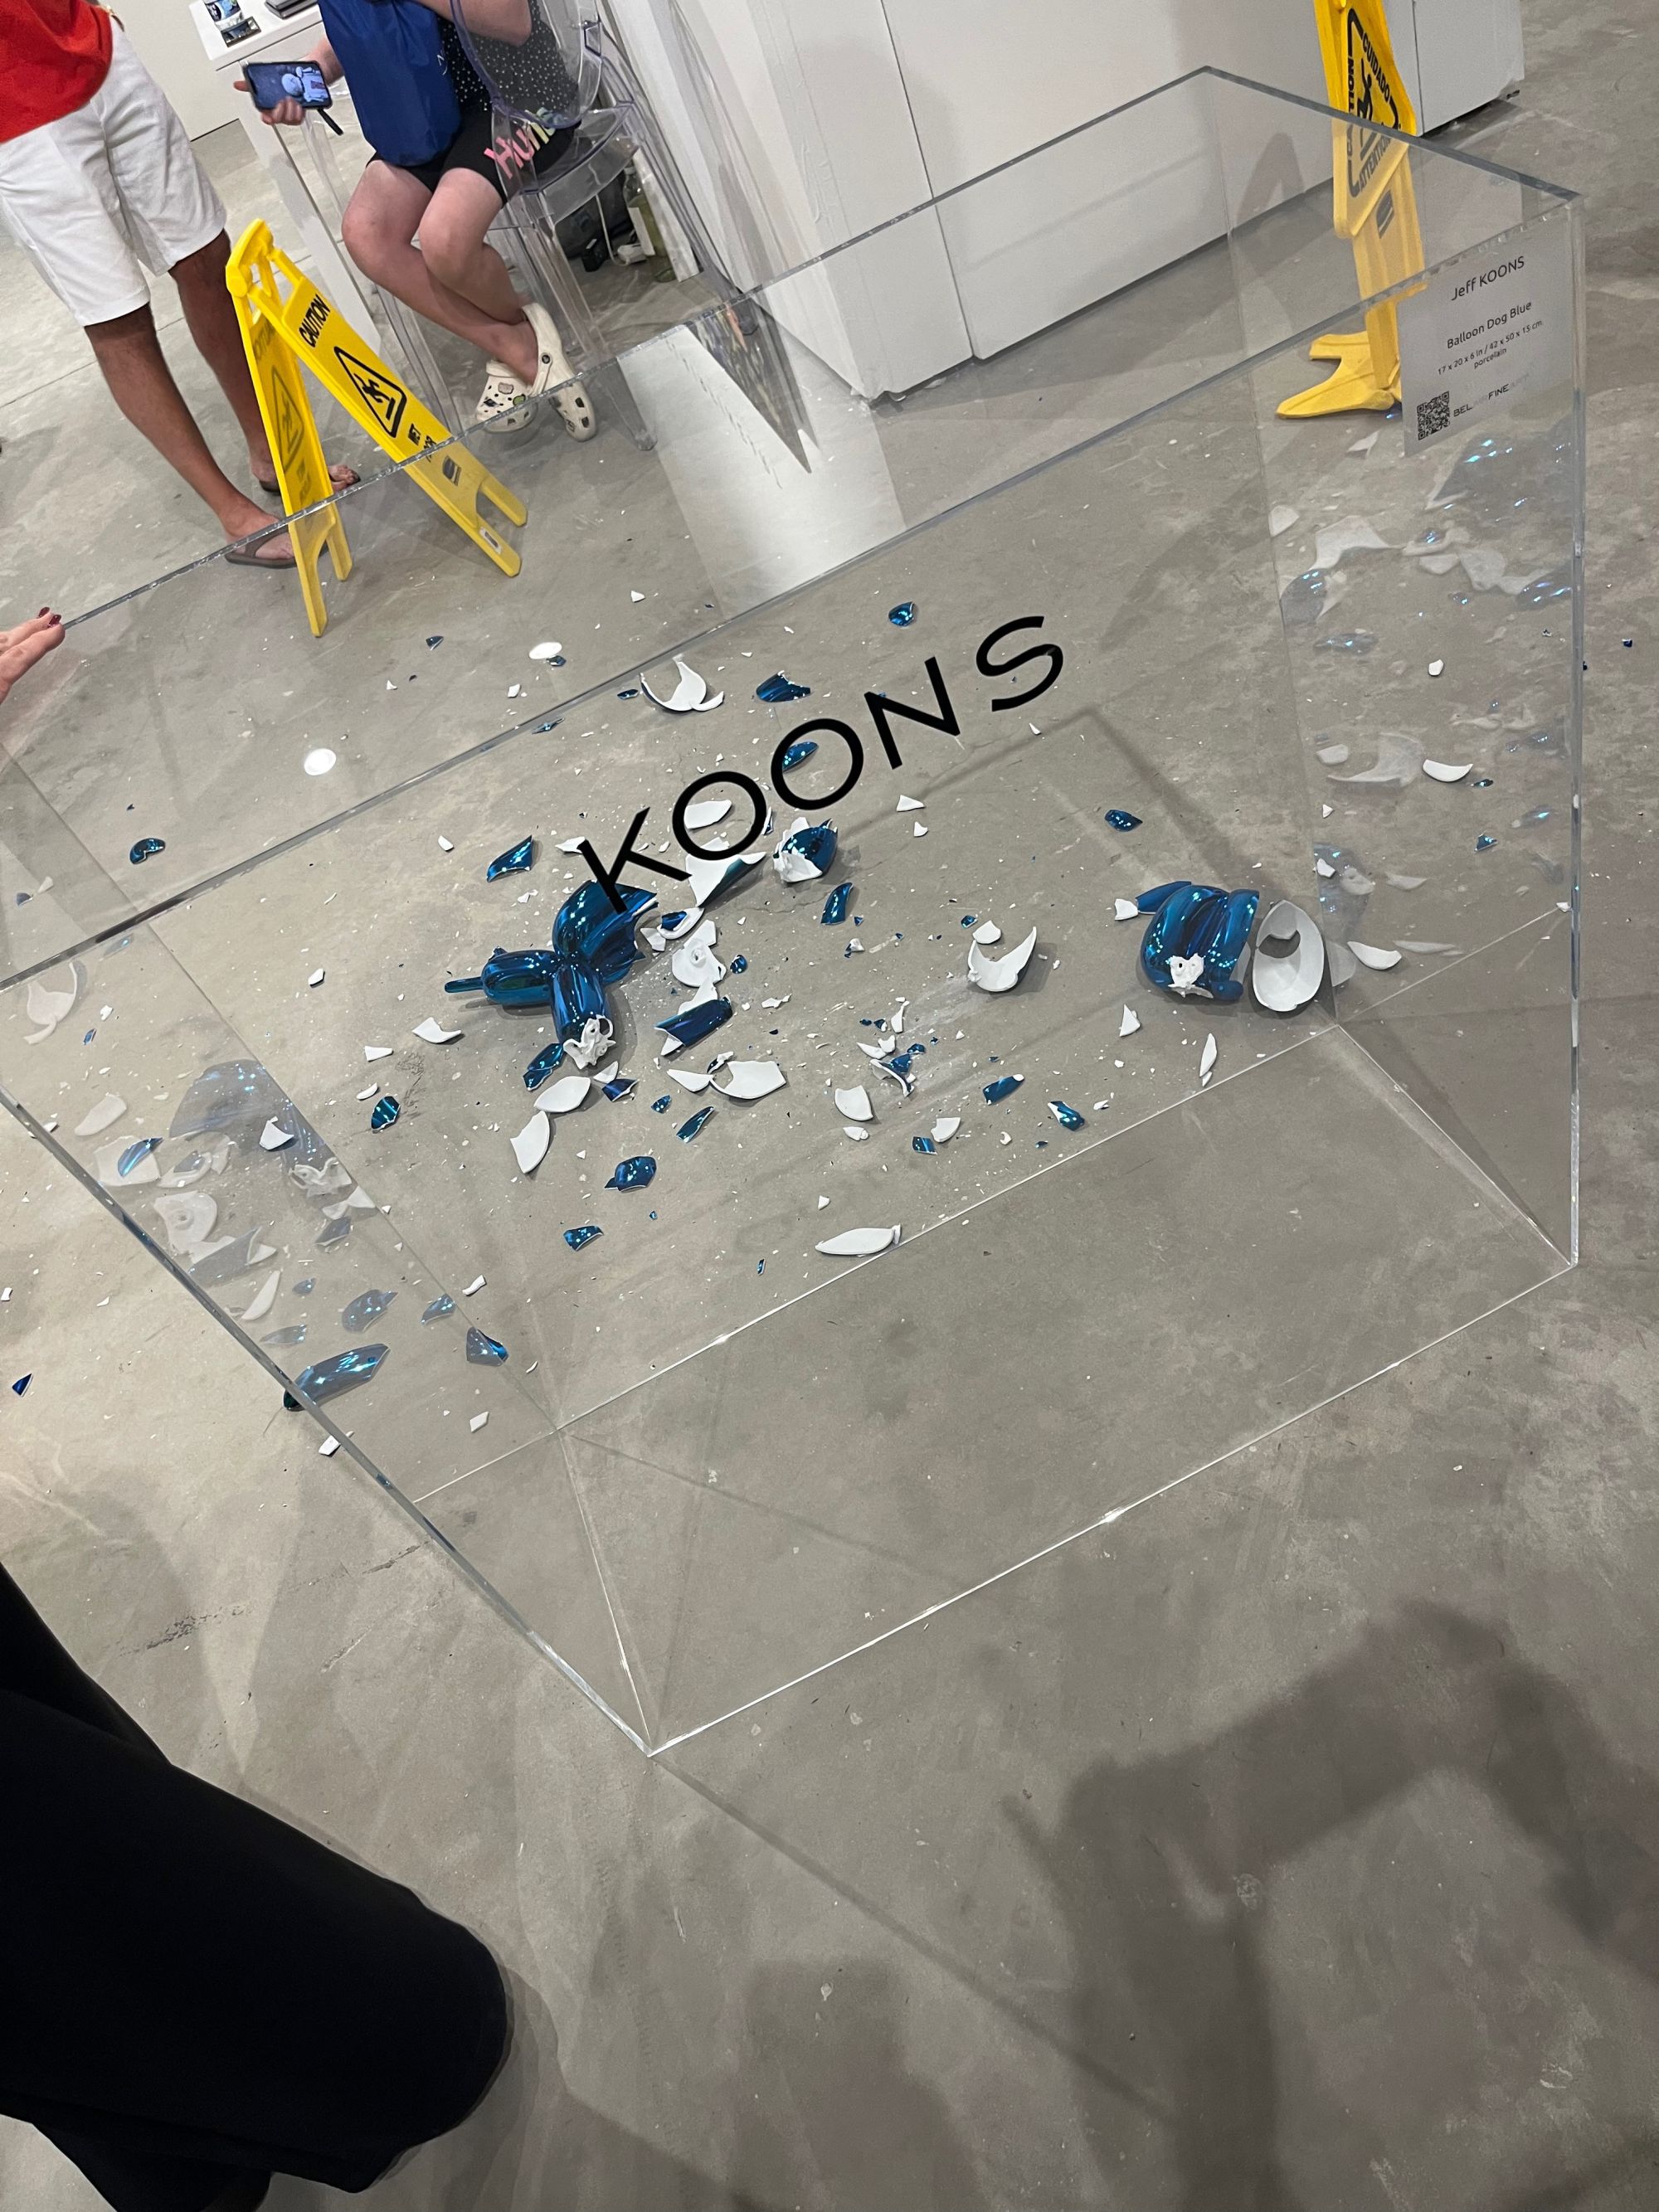 Heartbreaking': Visitor accidentally shatters Jeff Koons 'balloon dog'  sculpture at Art Wynwood